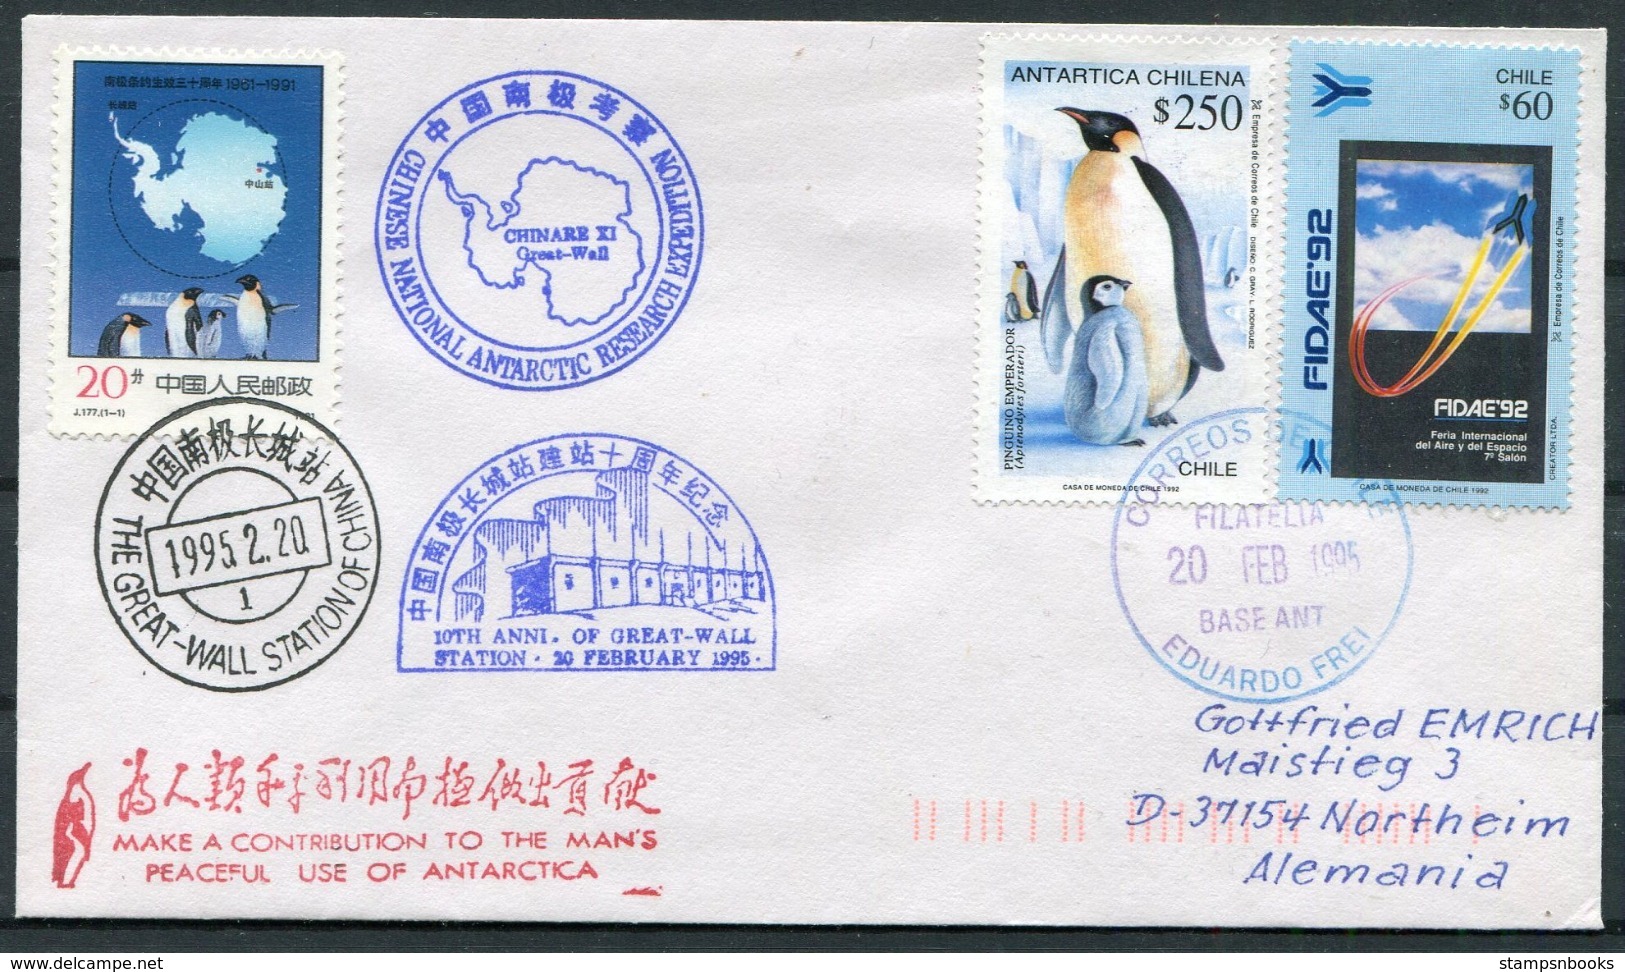 1995 Chile China, Antarctic Polar Expedition Penguin, Great Wall Station, Eduardo Frei, Antarctica CHINARE 11 Cover - Antarctic Expeditions